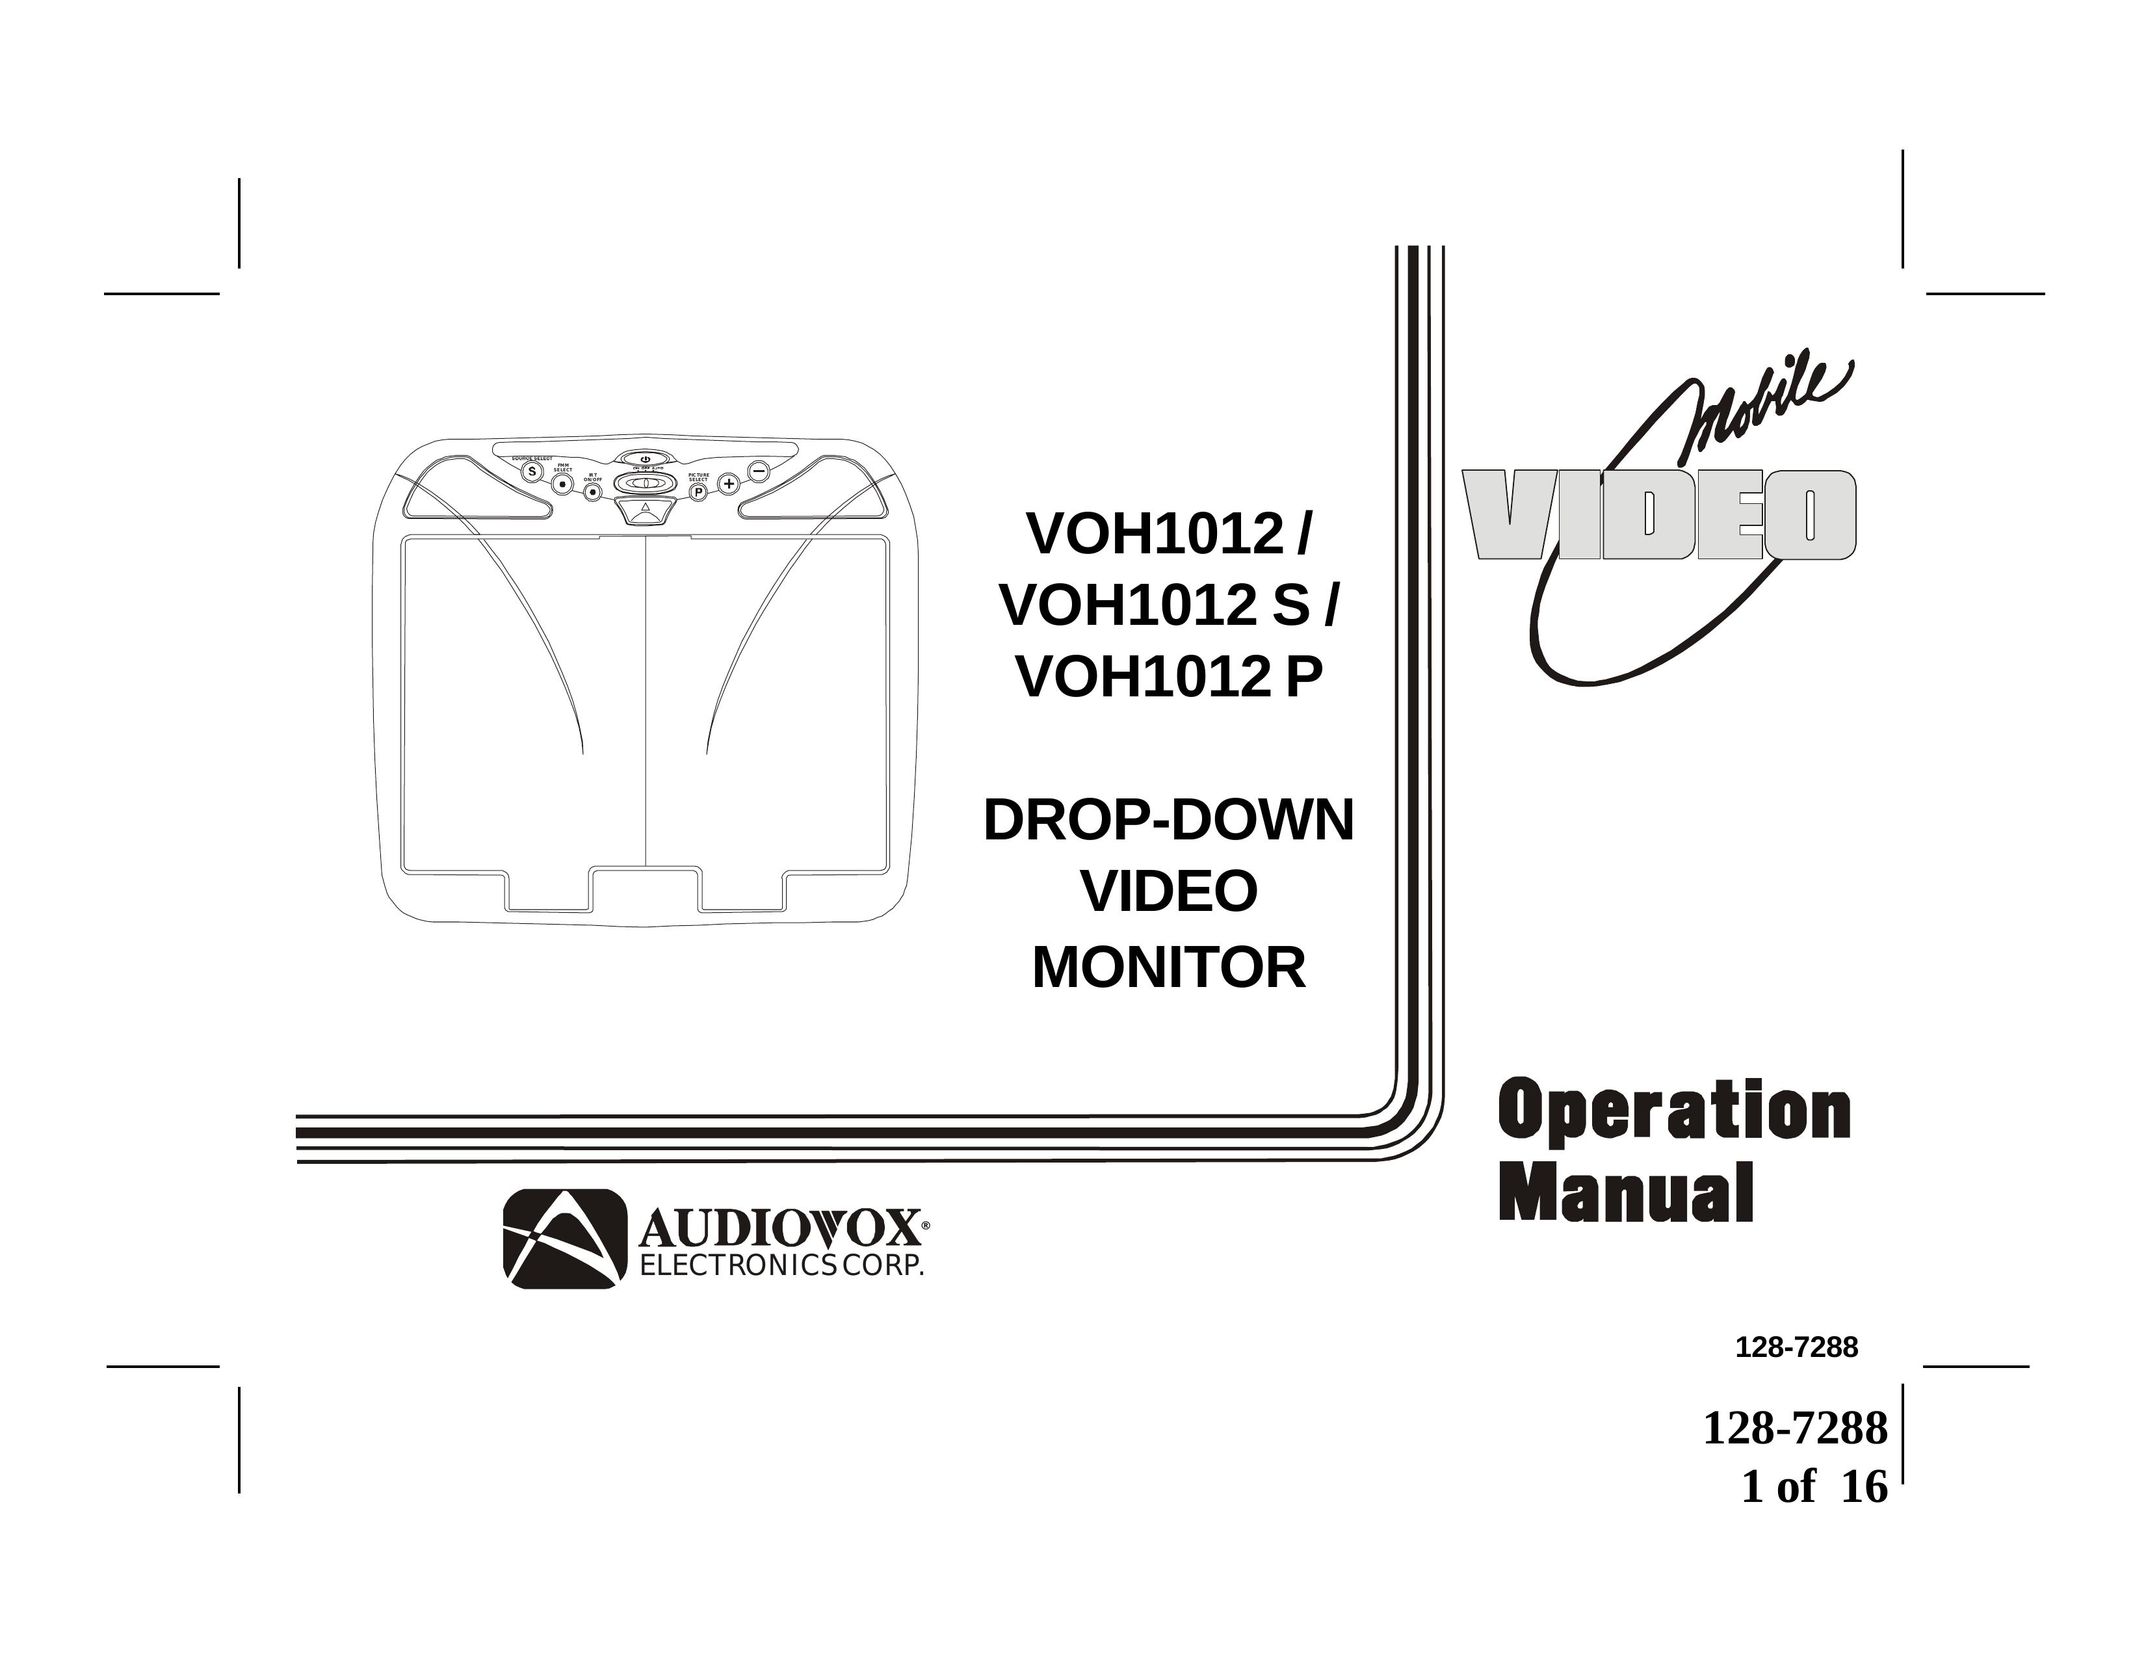 Audiovox VOH1012 S Computer Monitor User Manual